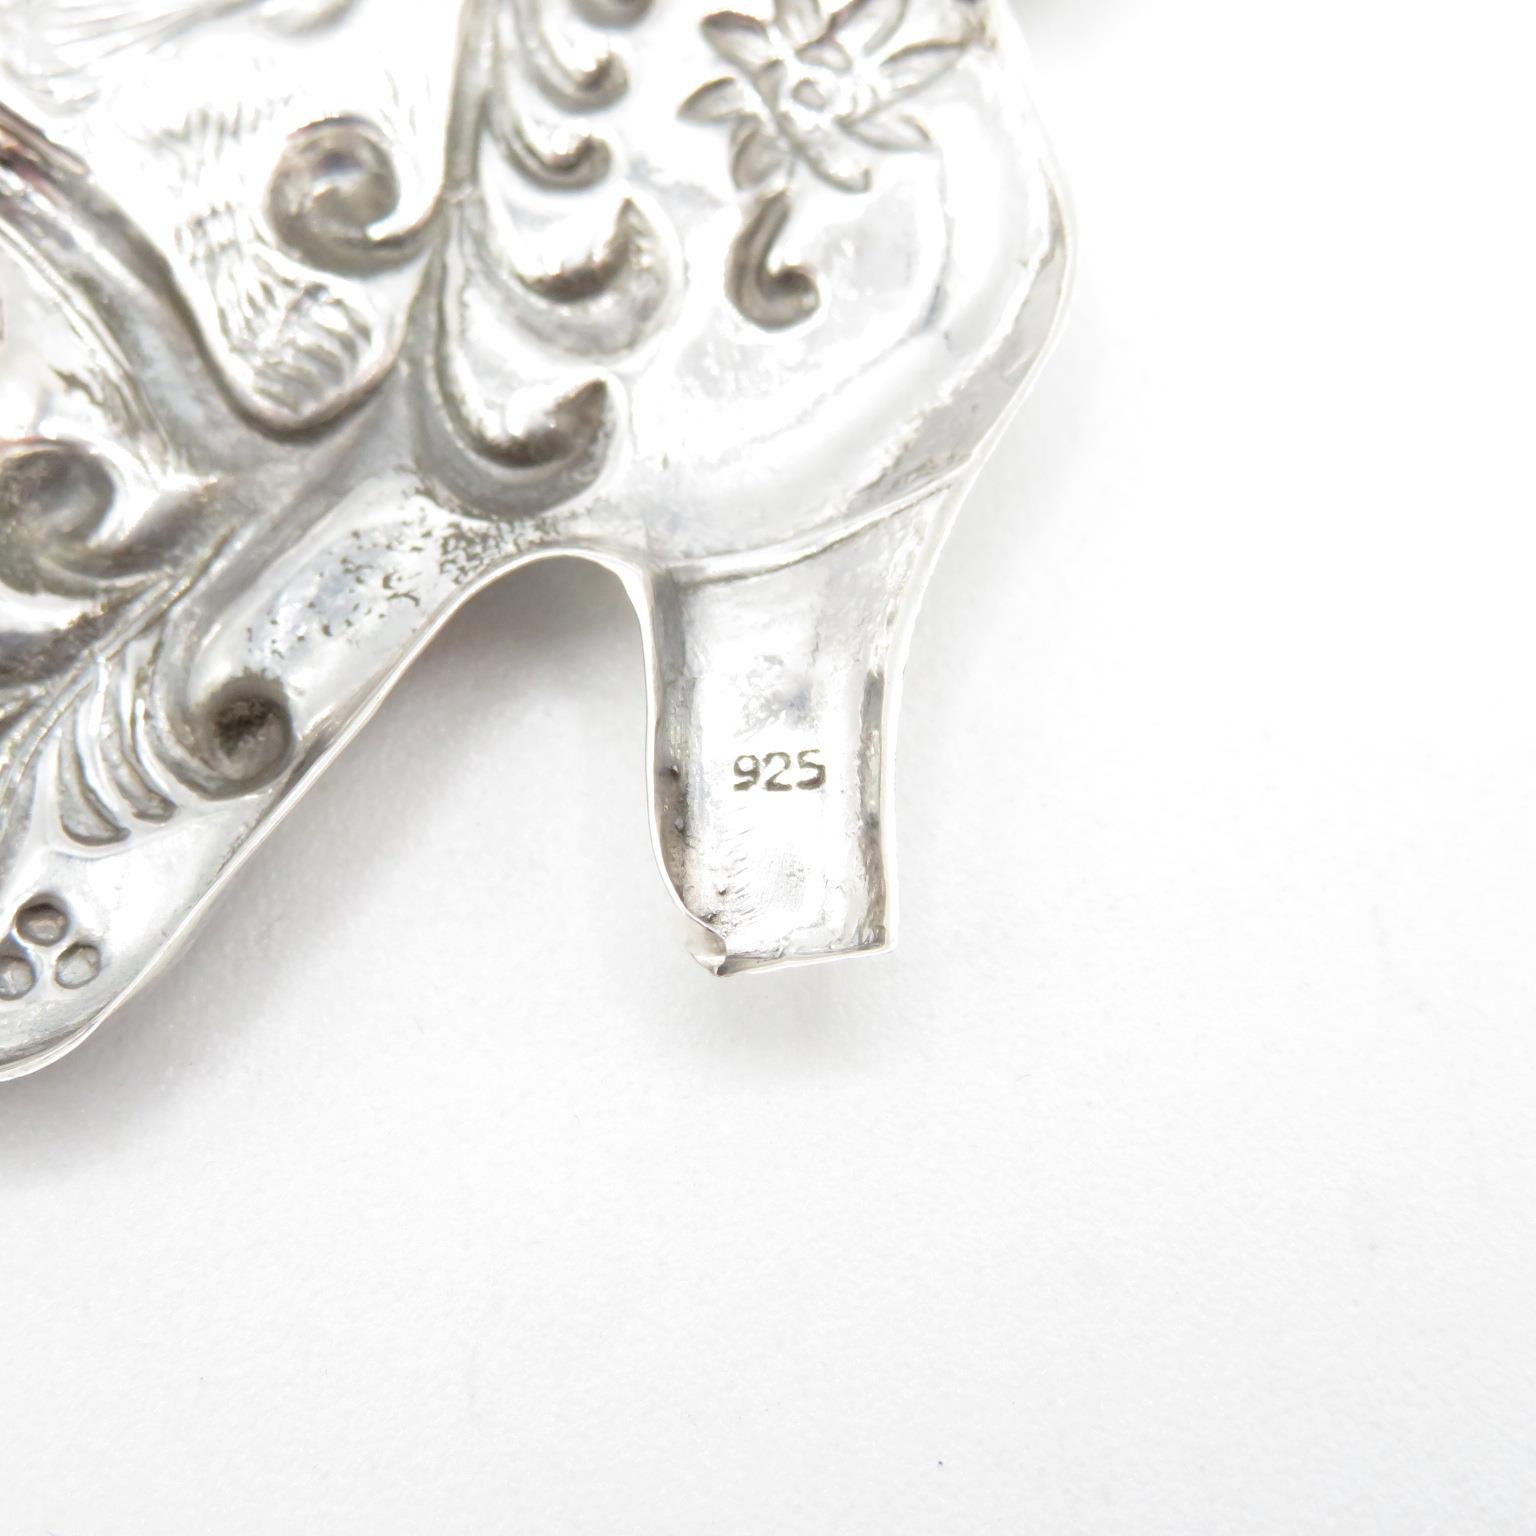 Pussycat in a shoe in HM Sterling Silver 925 brooch in excellent condition with tight fitting pin ( - Image 4 of 4